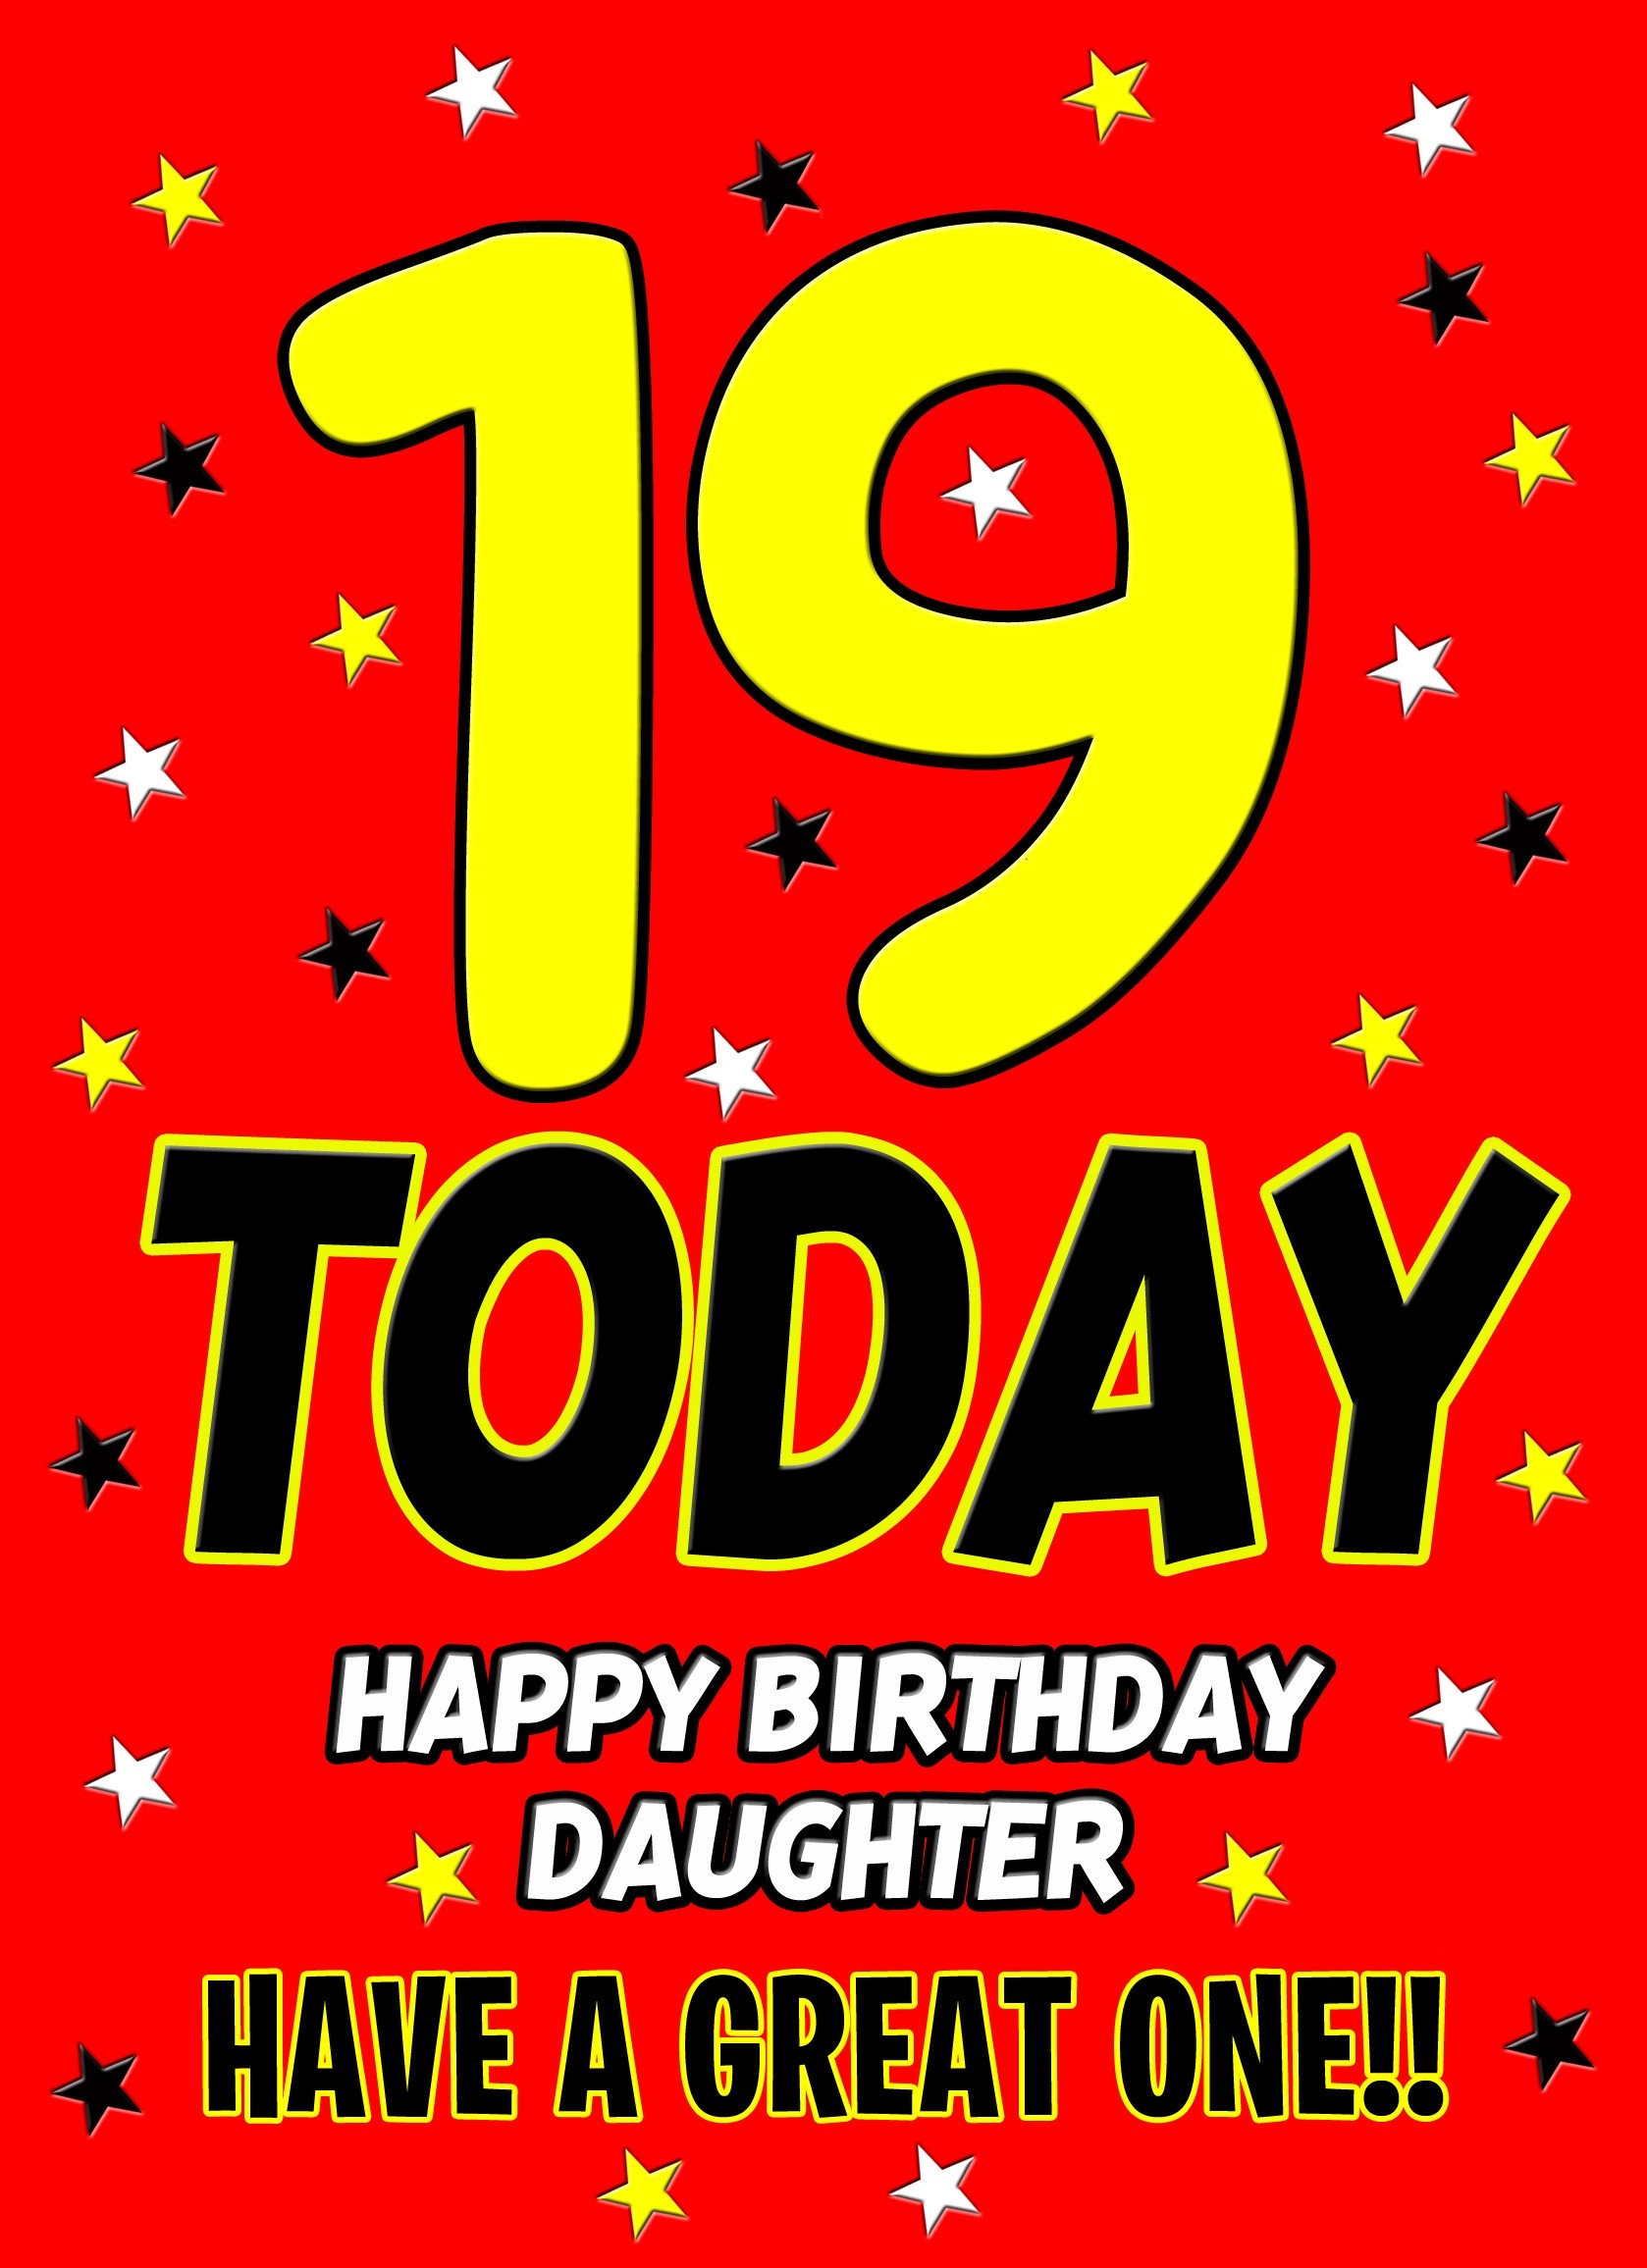 19 Today Birthday Card (Daughter)